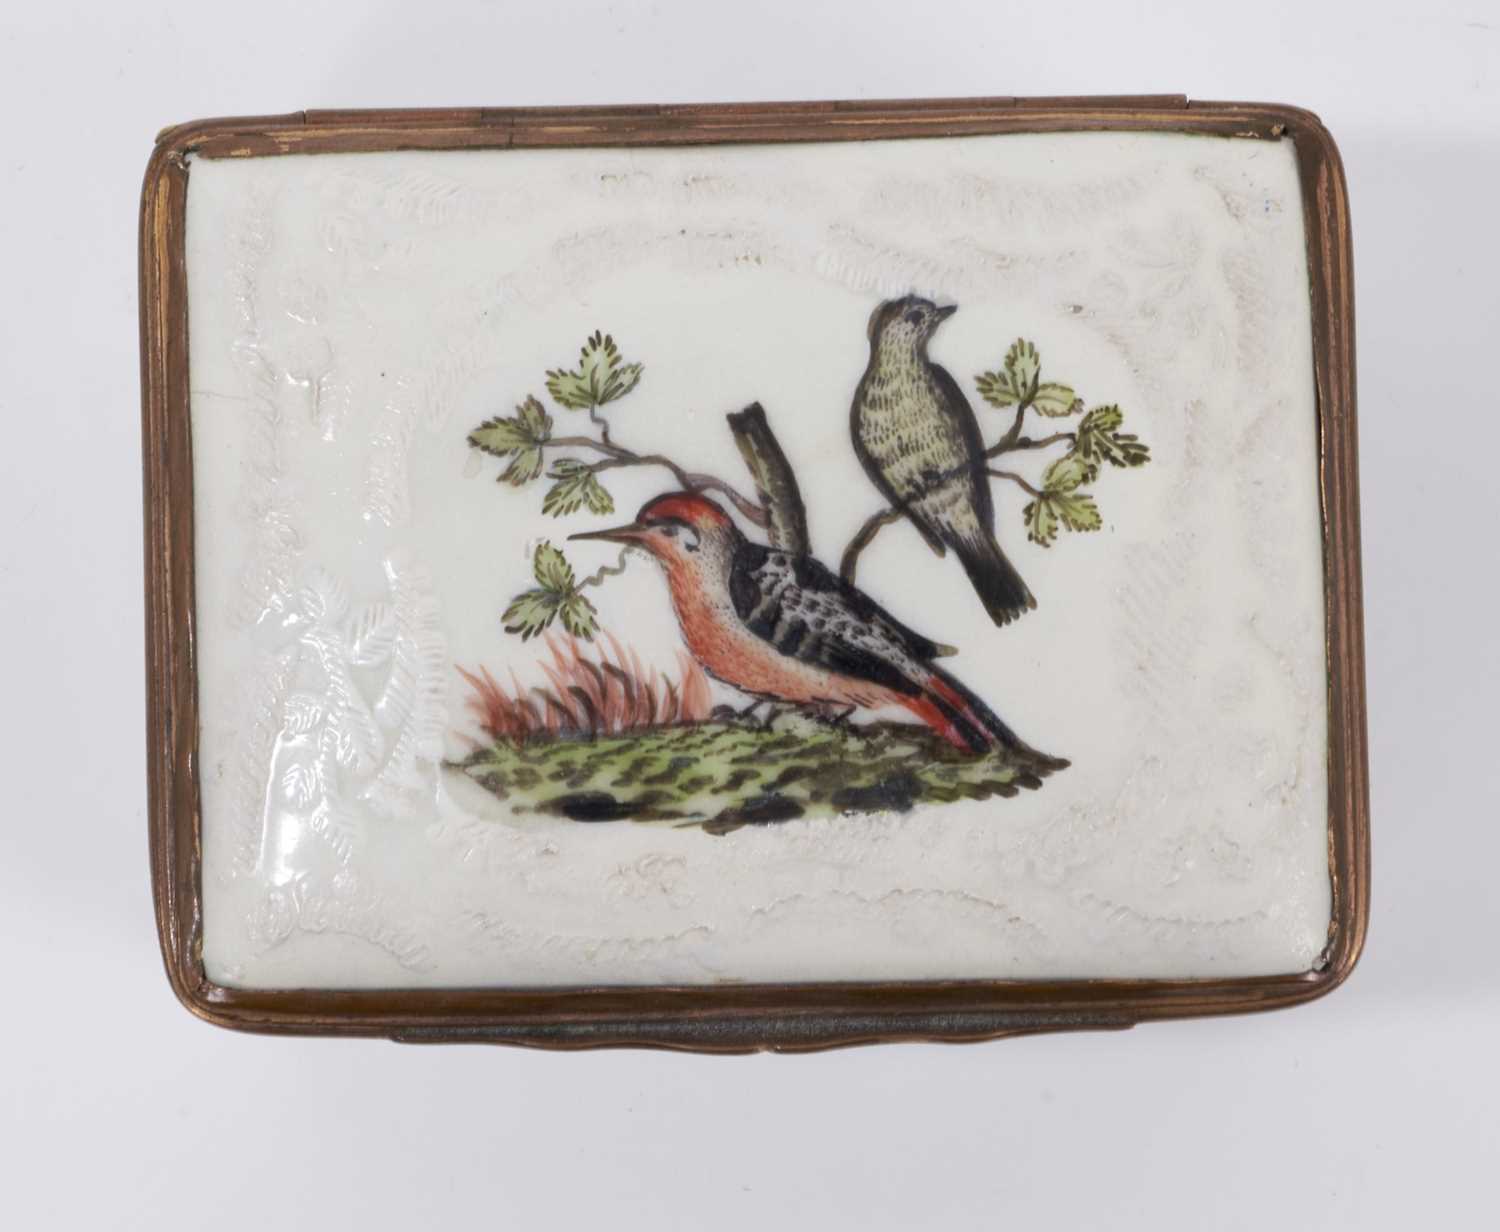 An 18th century enamel box, painted with birds - Image 2 of 4